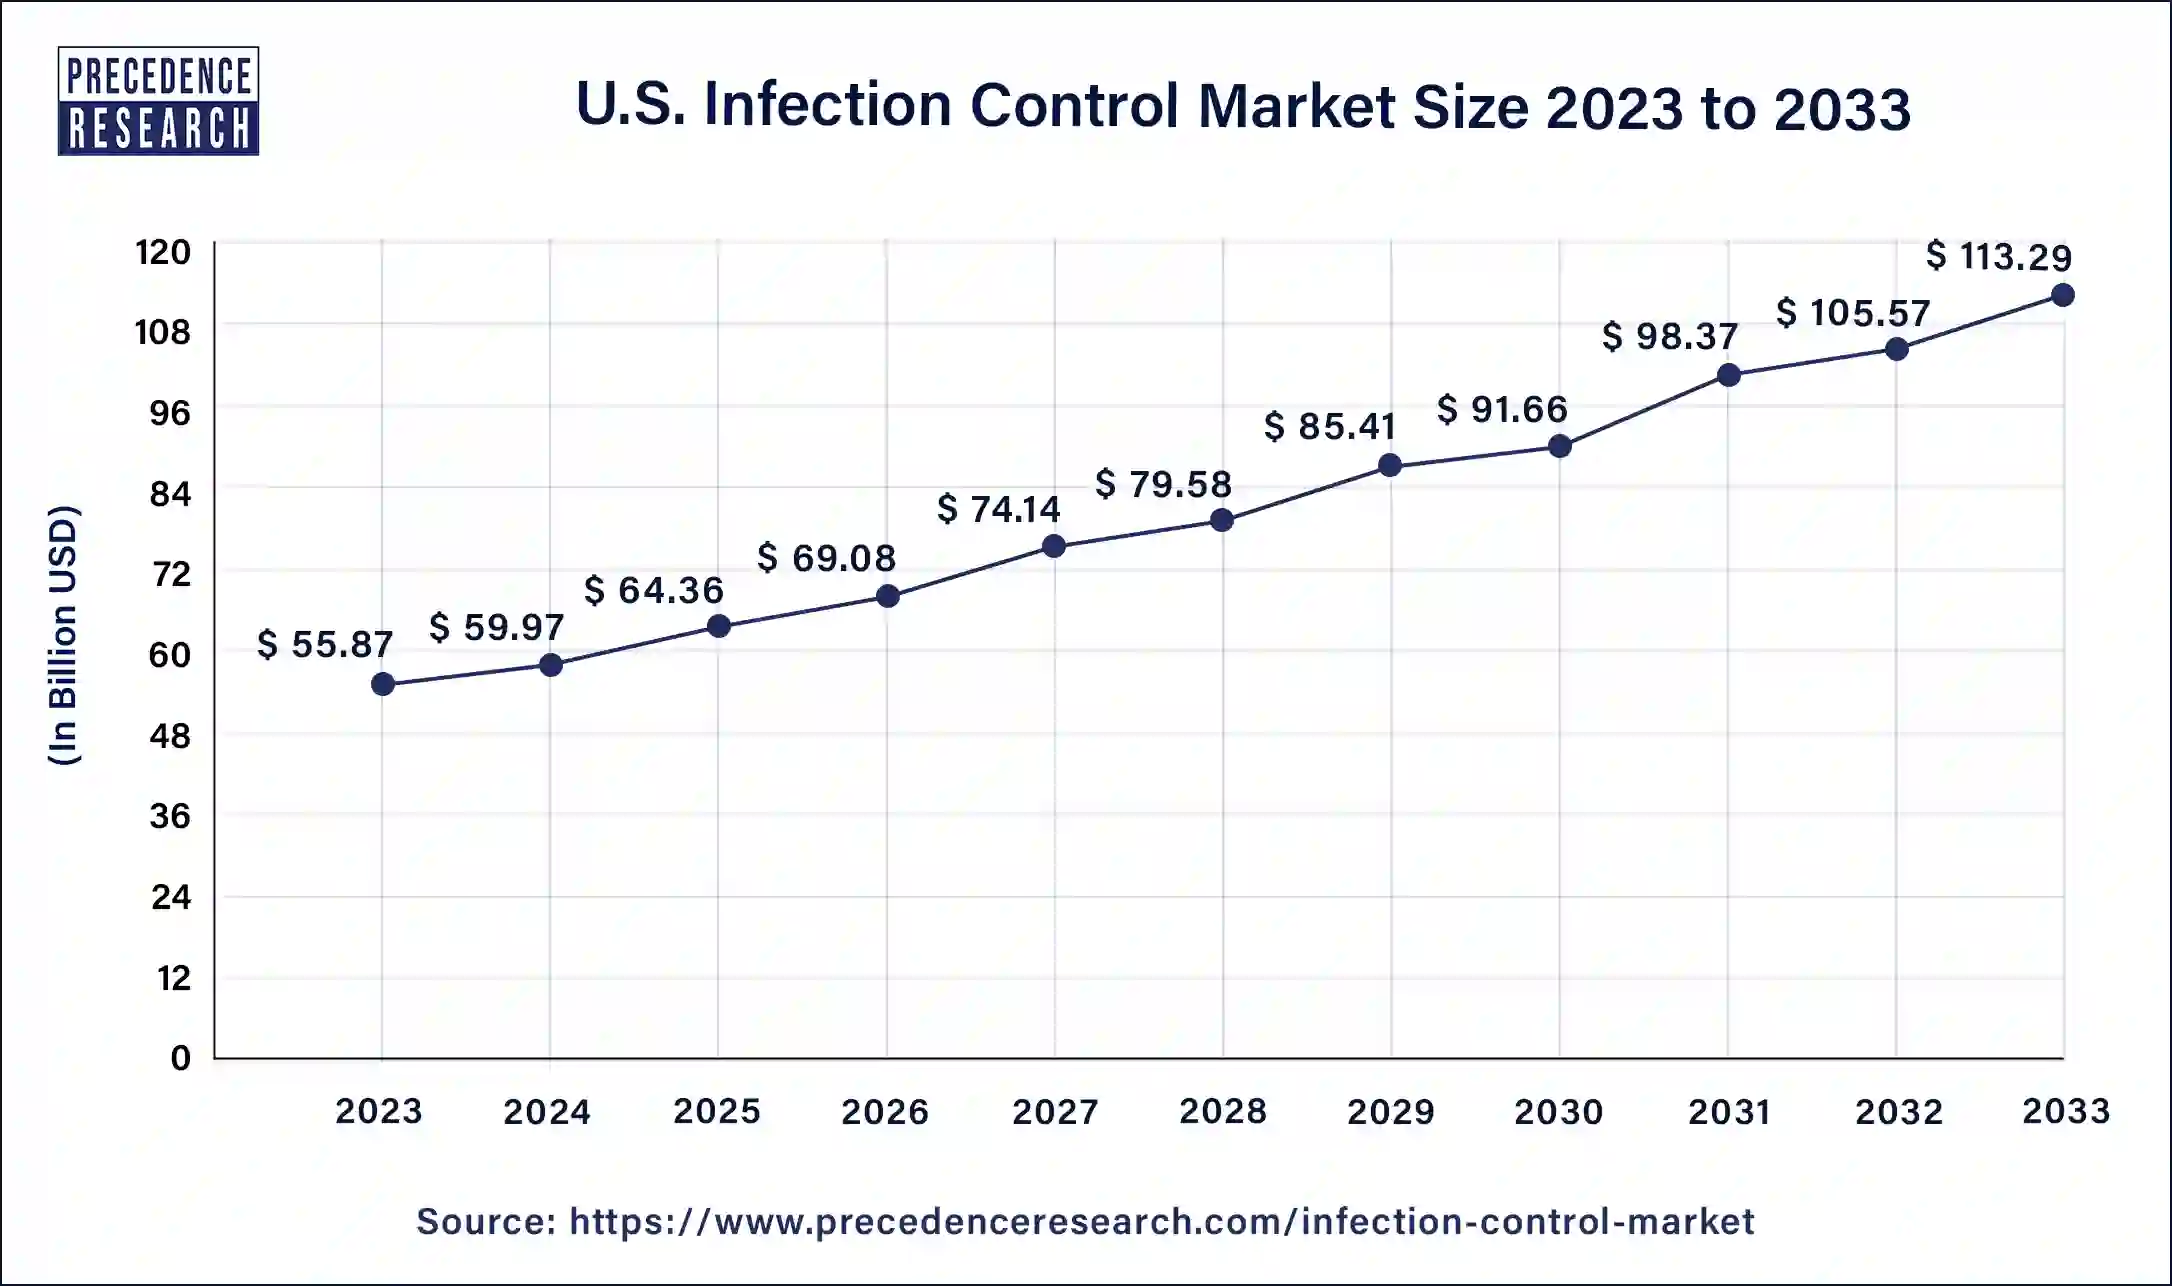 U.S. Infection Control Market Size 2024 to 2033